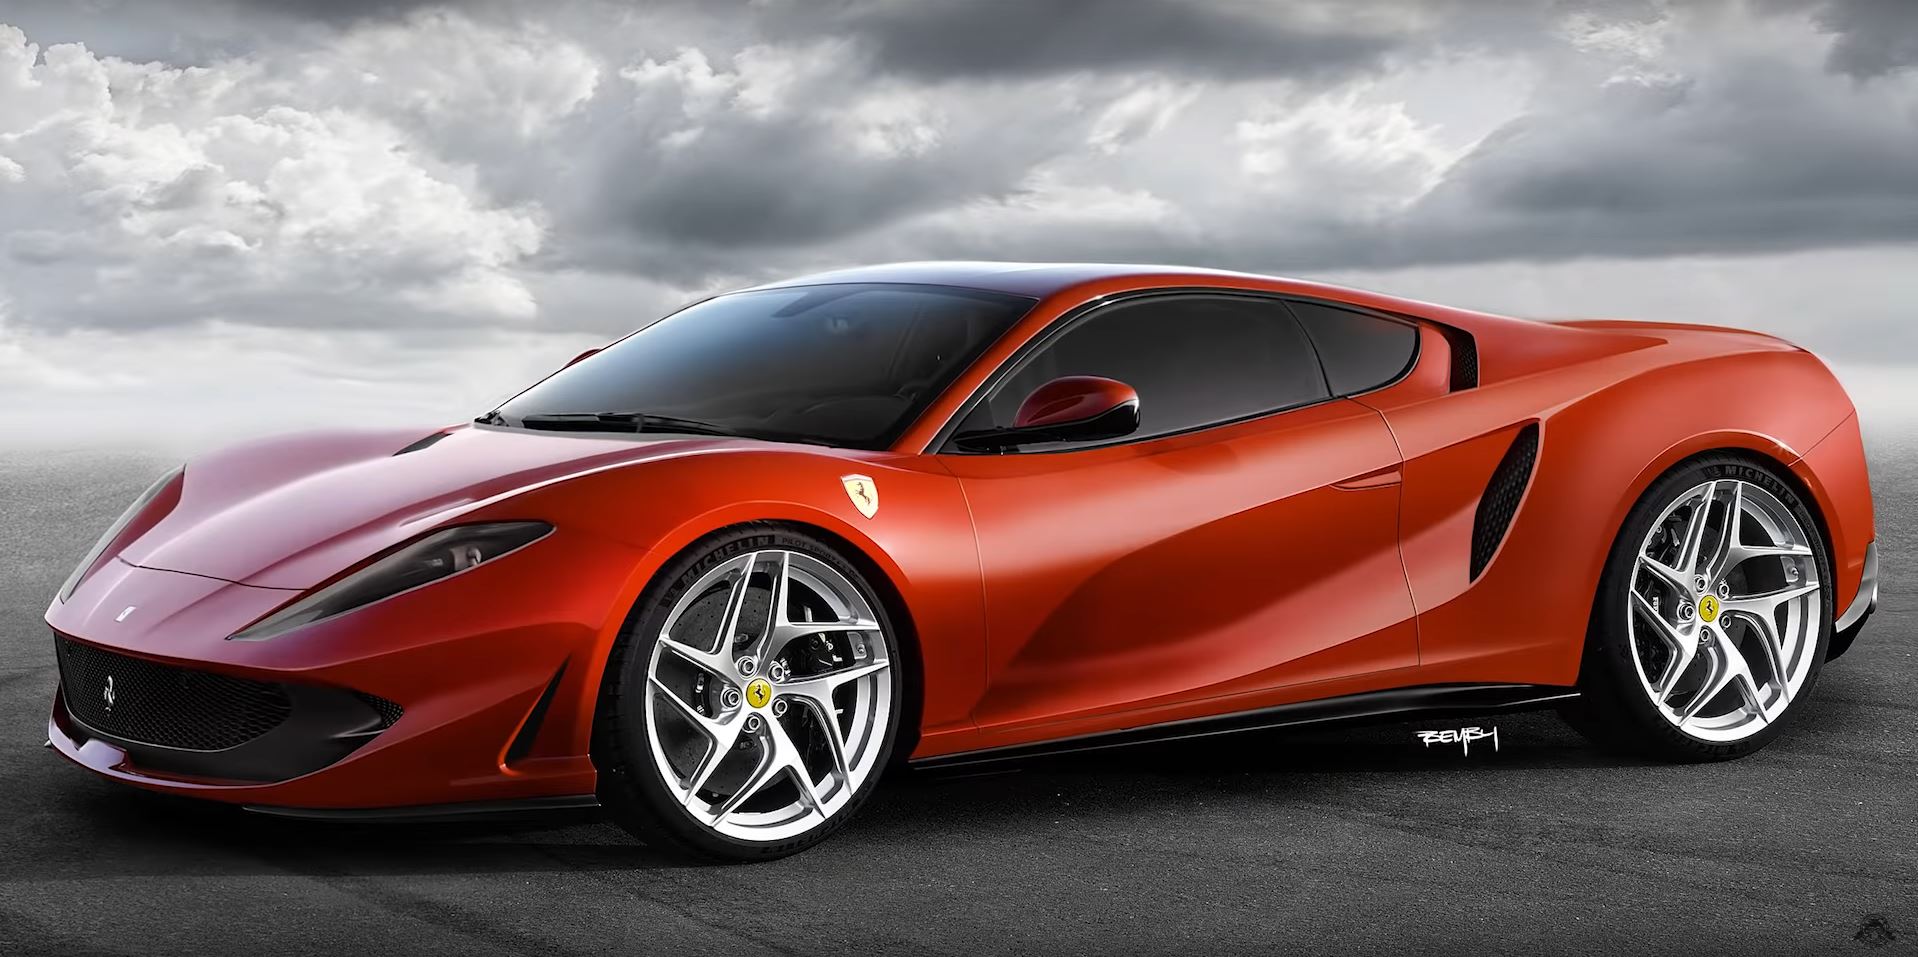 What Would the Ferrari 812 Superfast Look Like as a Mid-Engined V12 Supercar? - autoevolution